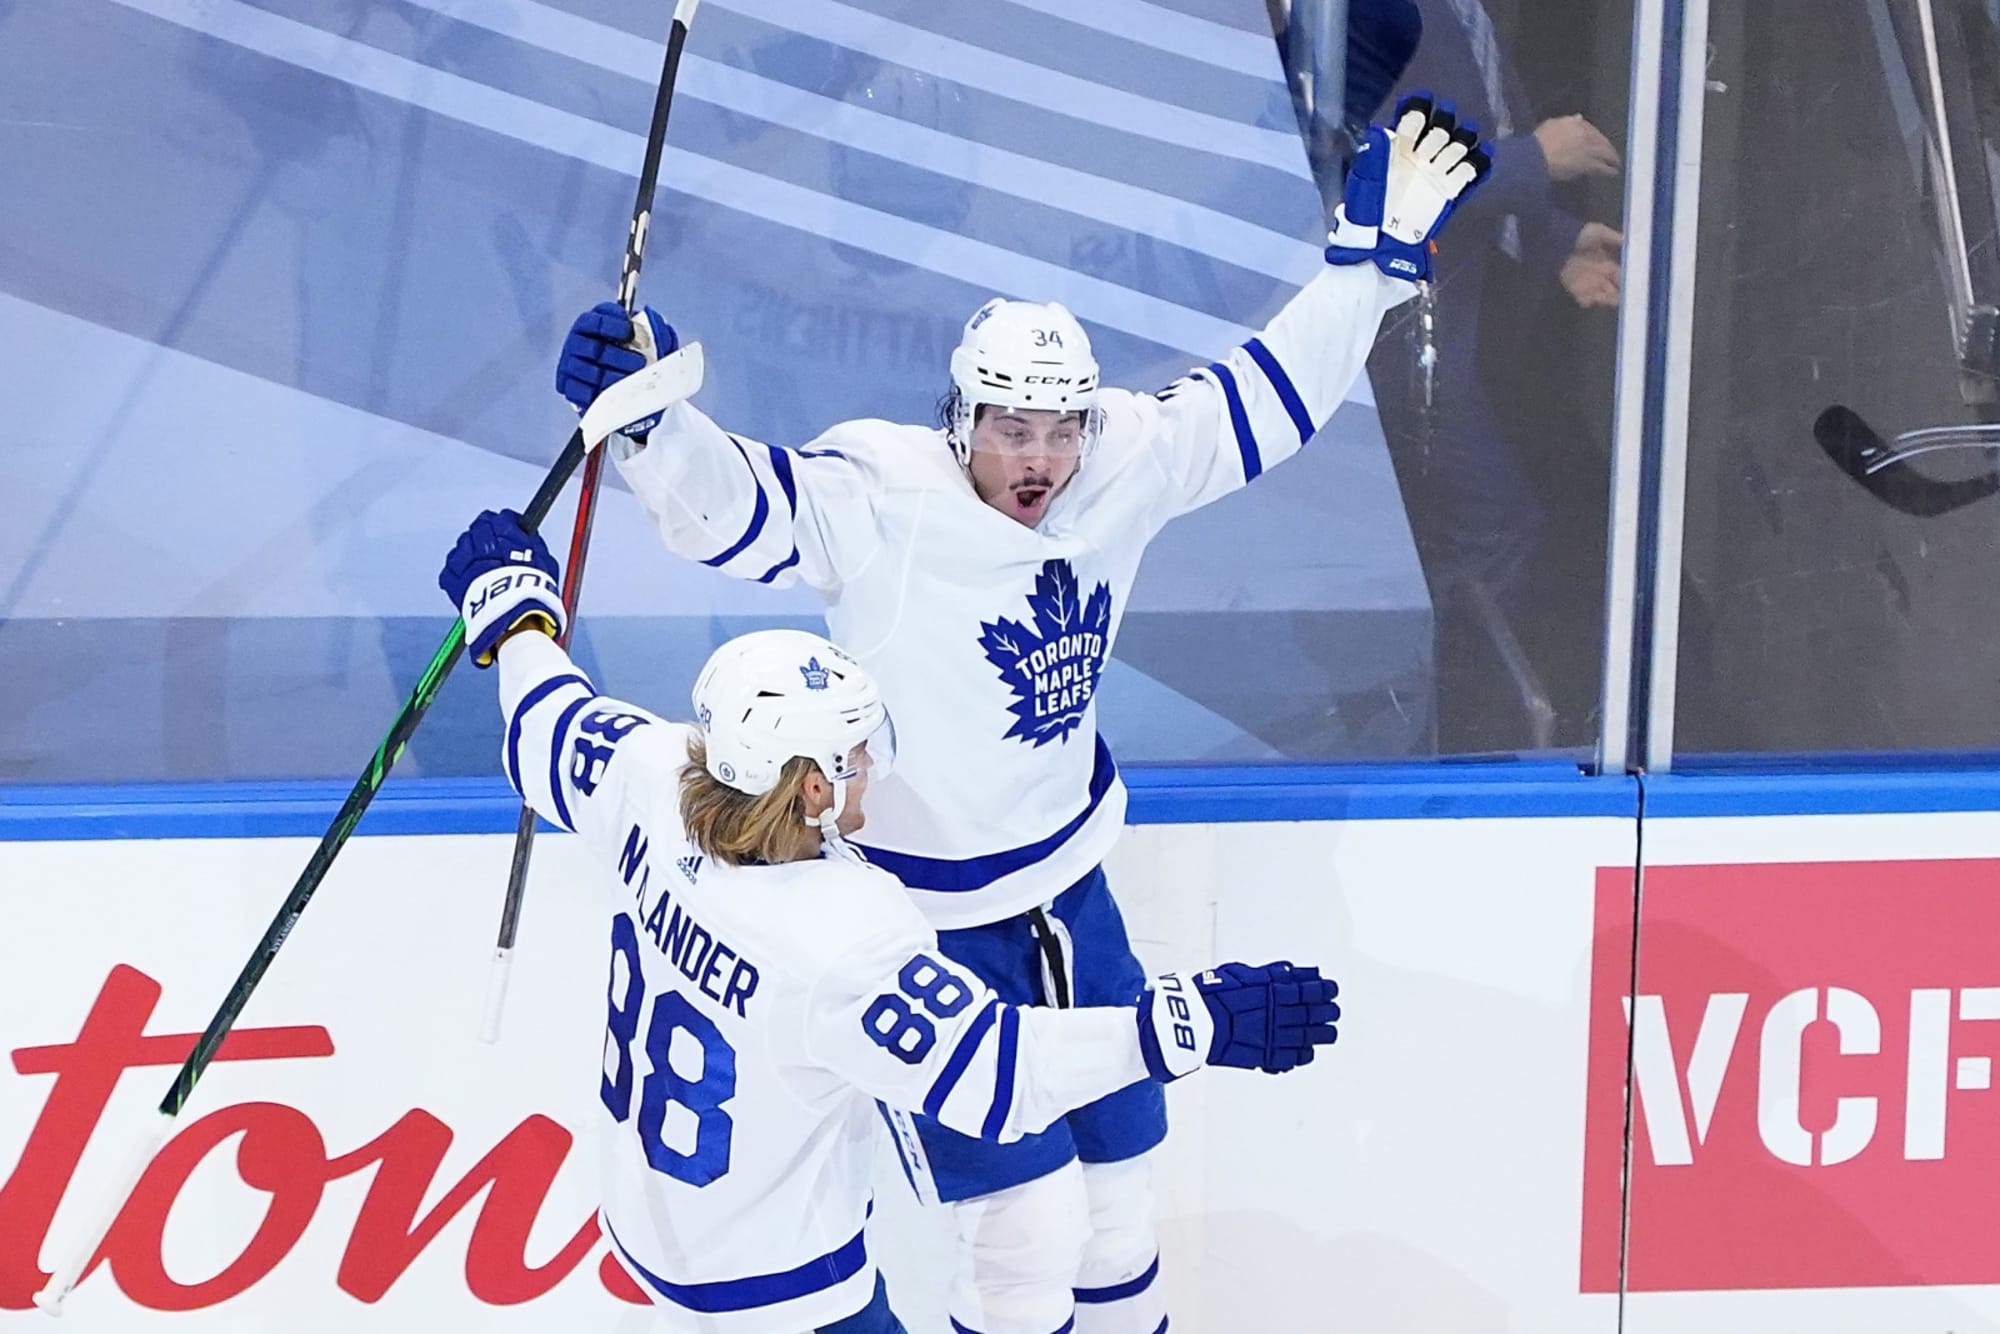 Toronto Maple Leafs Everything You Need to Know for Game 5